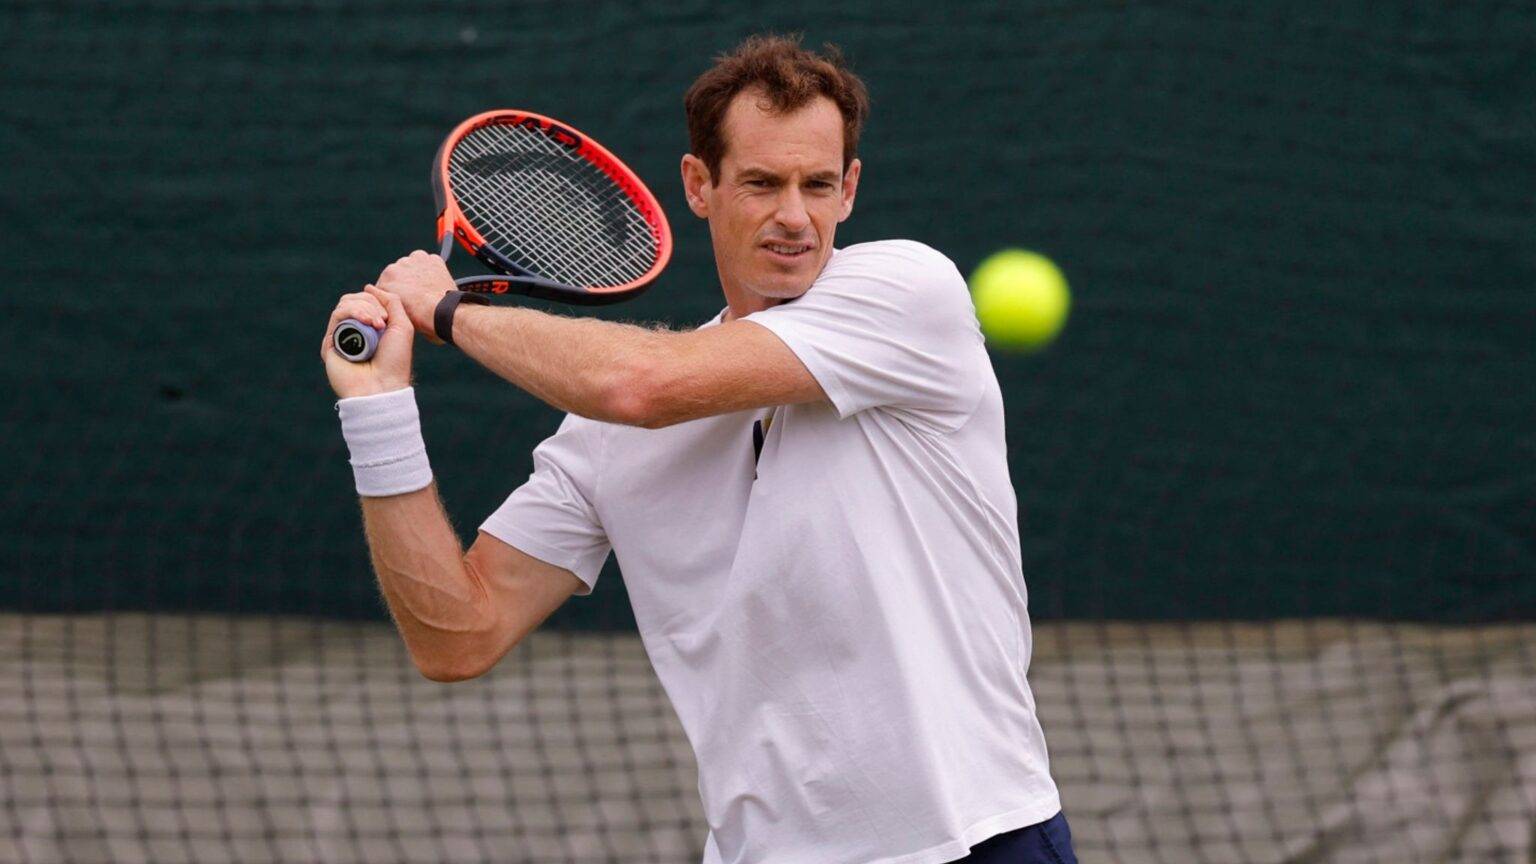 What time is Andy Murray playing at Wimbledon today?